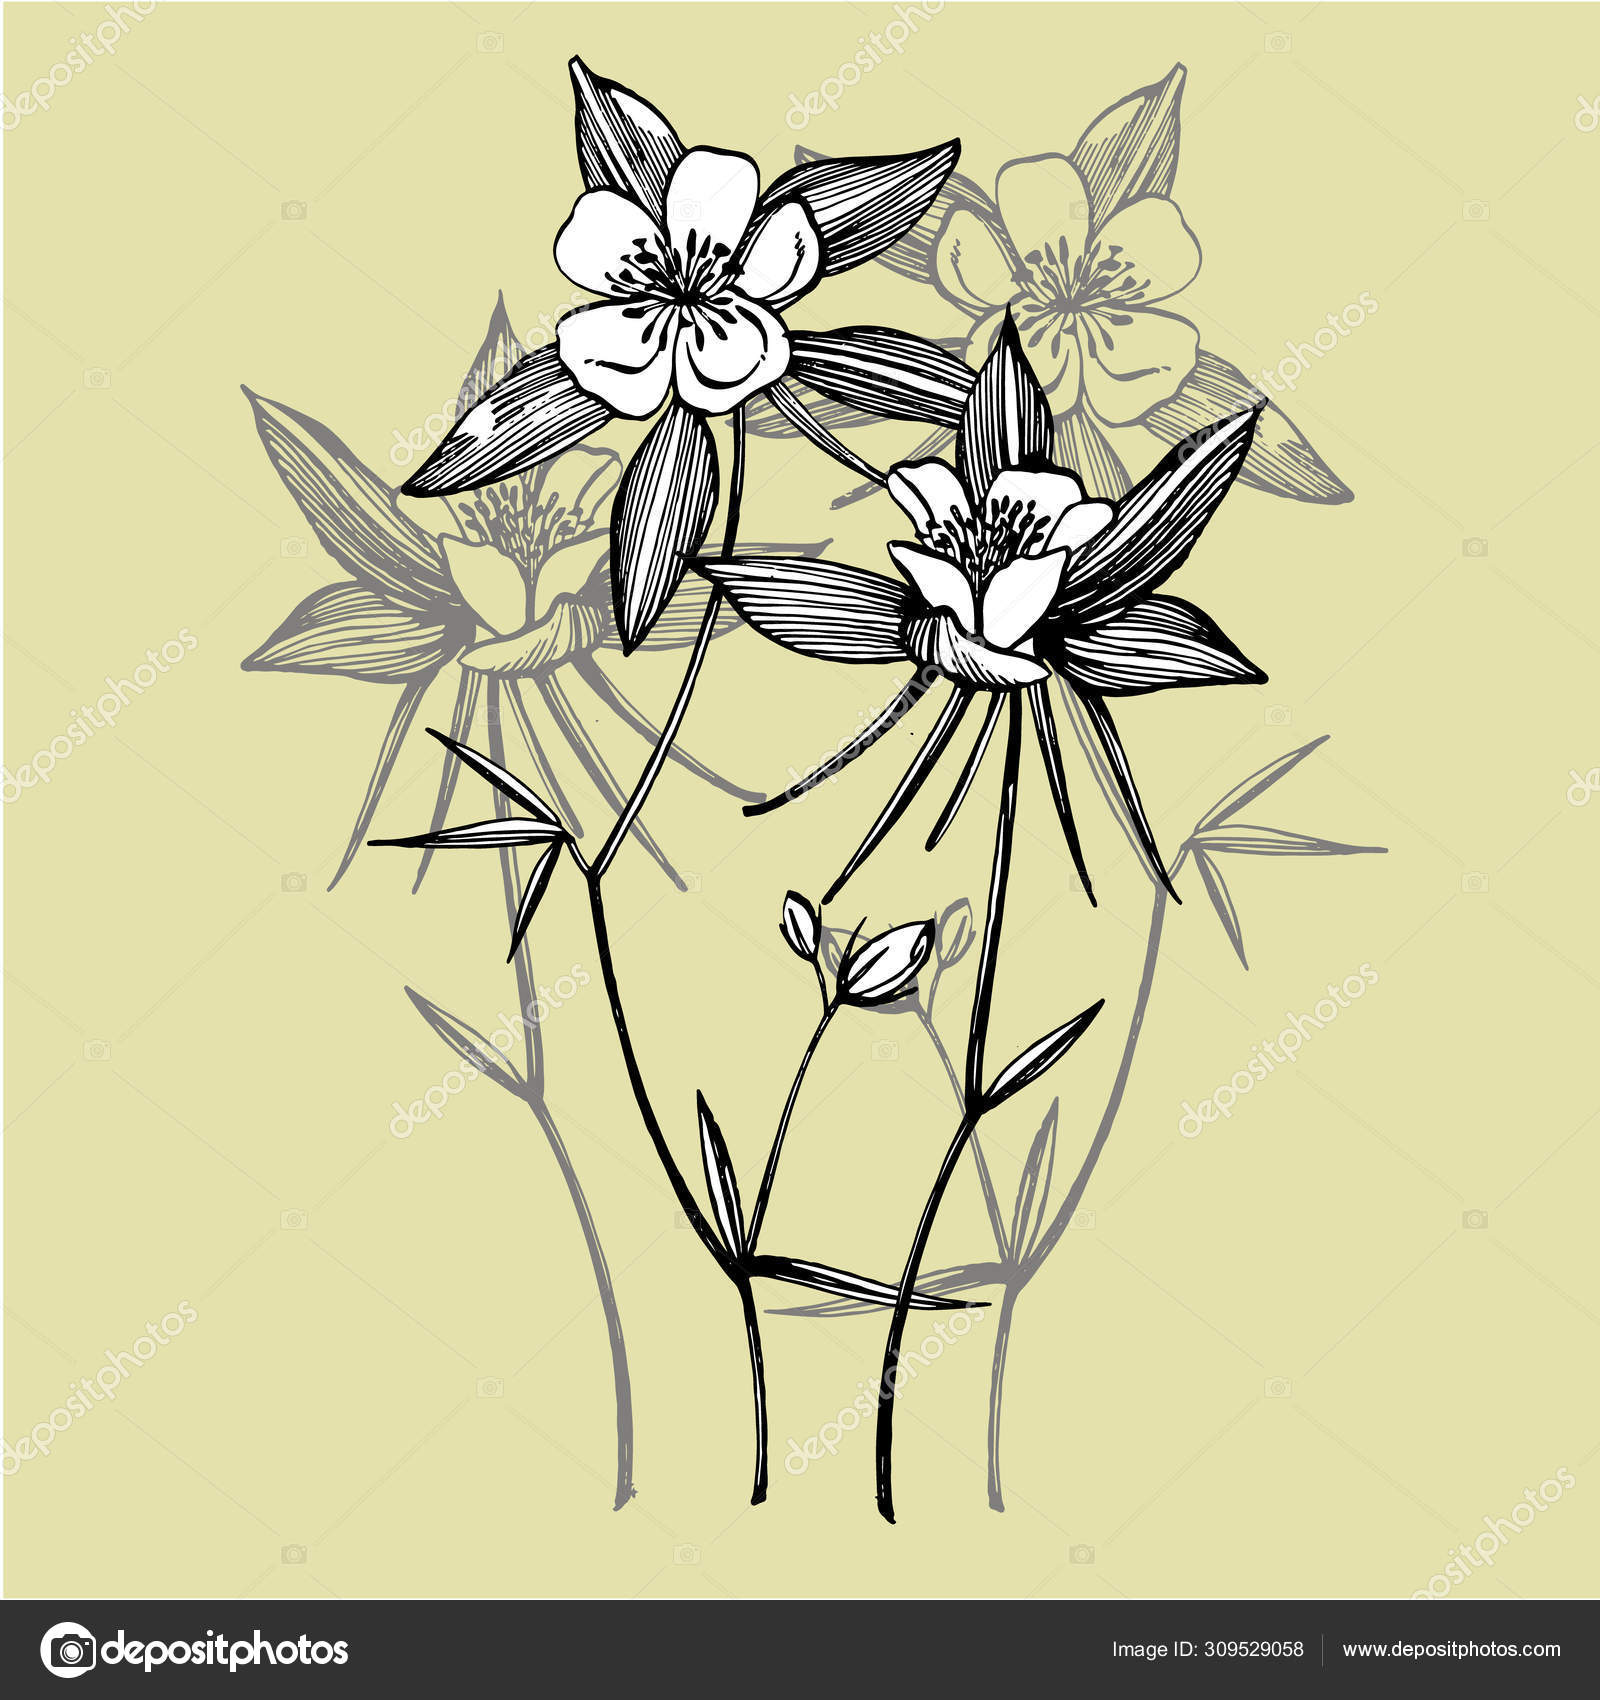 Double Columbine Flowers Collection Of Hand Drawn Flowers And Plants Botany Set Vintage Flowers Black And White Illustration In The Style Of Engravings Stock Vector C Asetrova 309529058